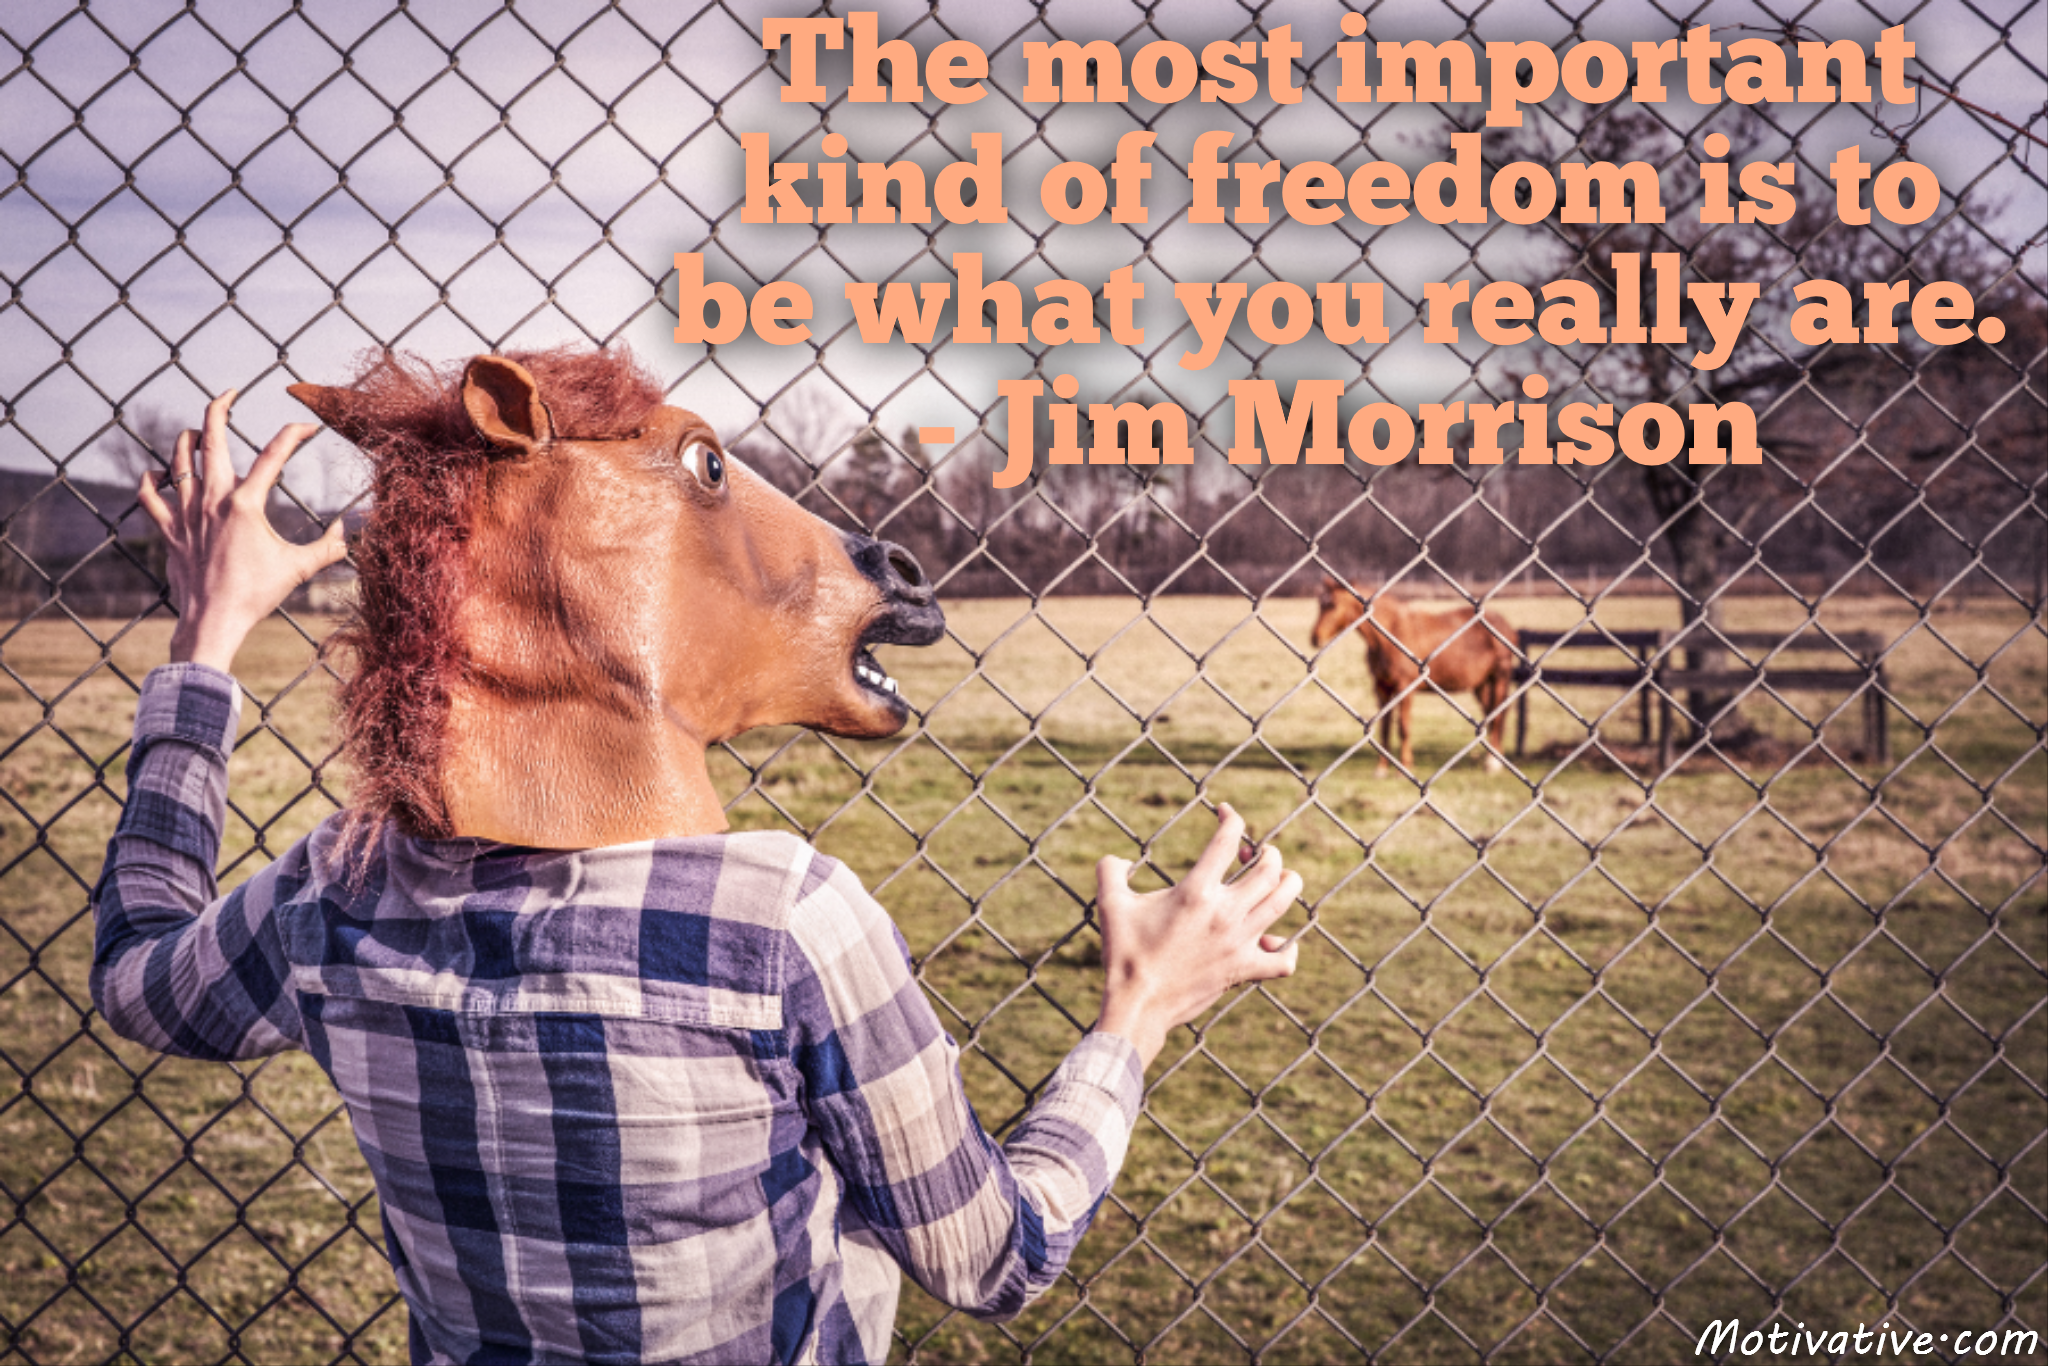 The most important kind of freedom is to be what you really are. – Jim Morrison